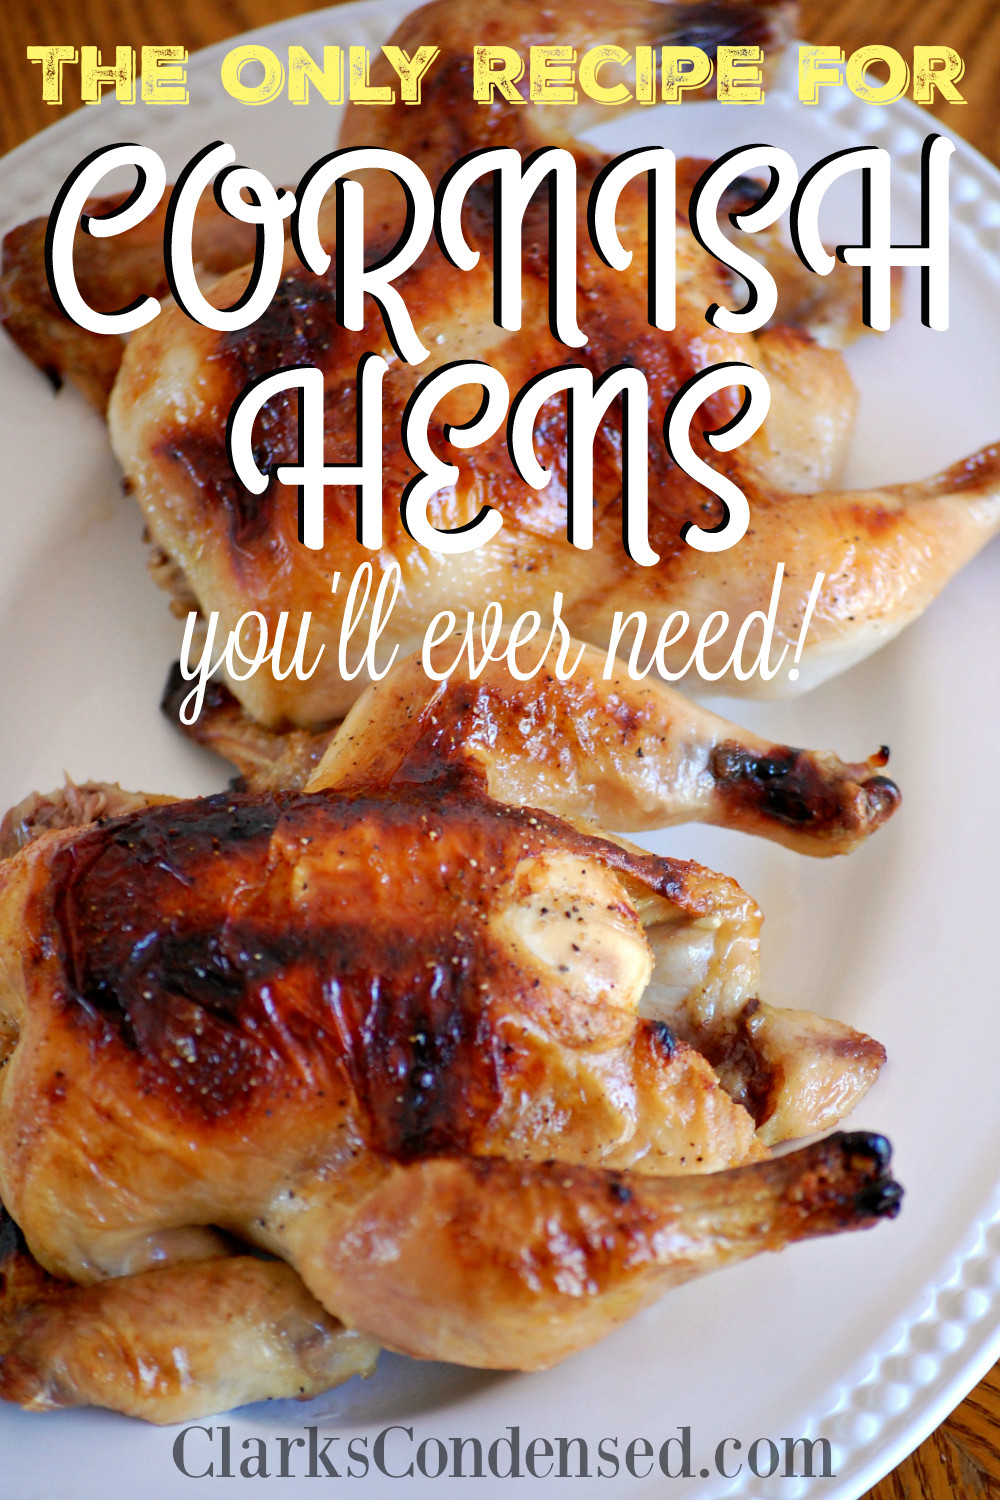 Recipes For Cornish Game Hens
 The ly Recipe for Cornish Hens You Will Ever Need